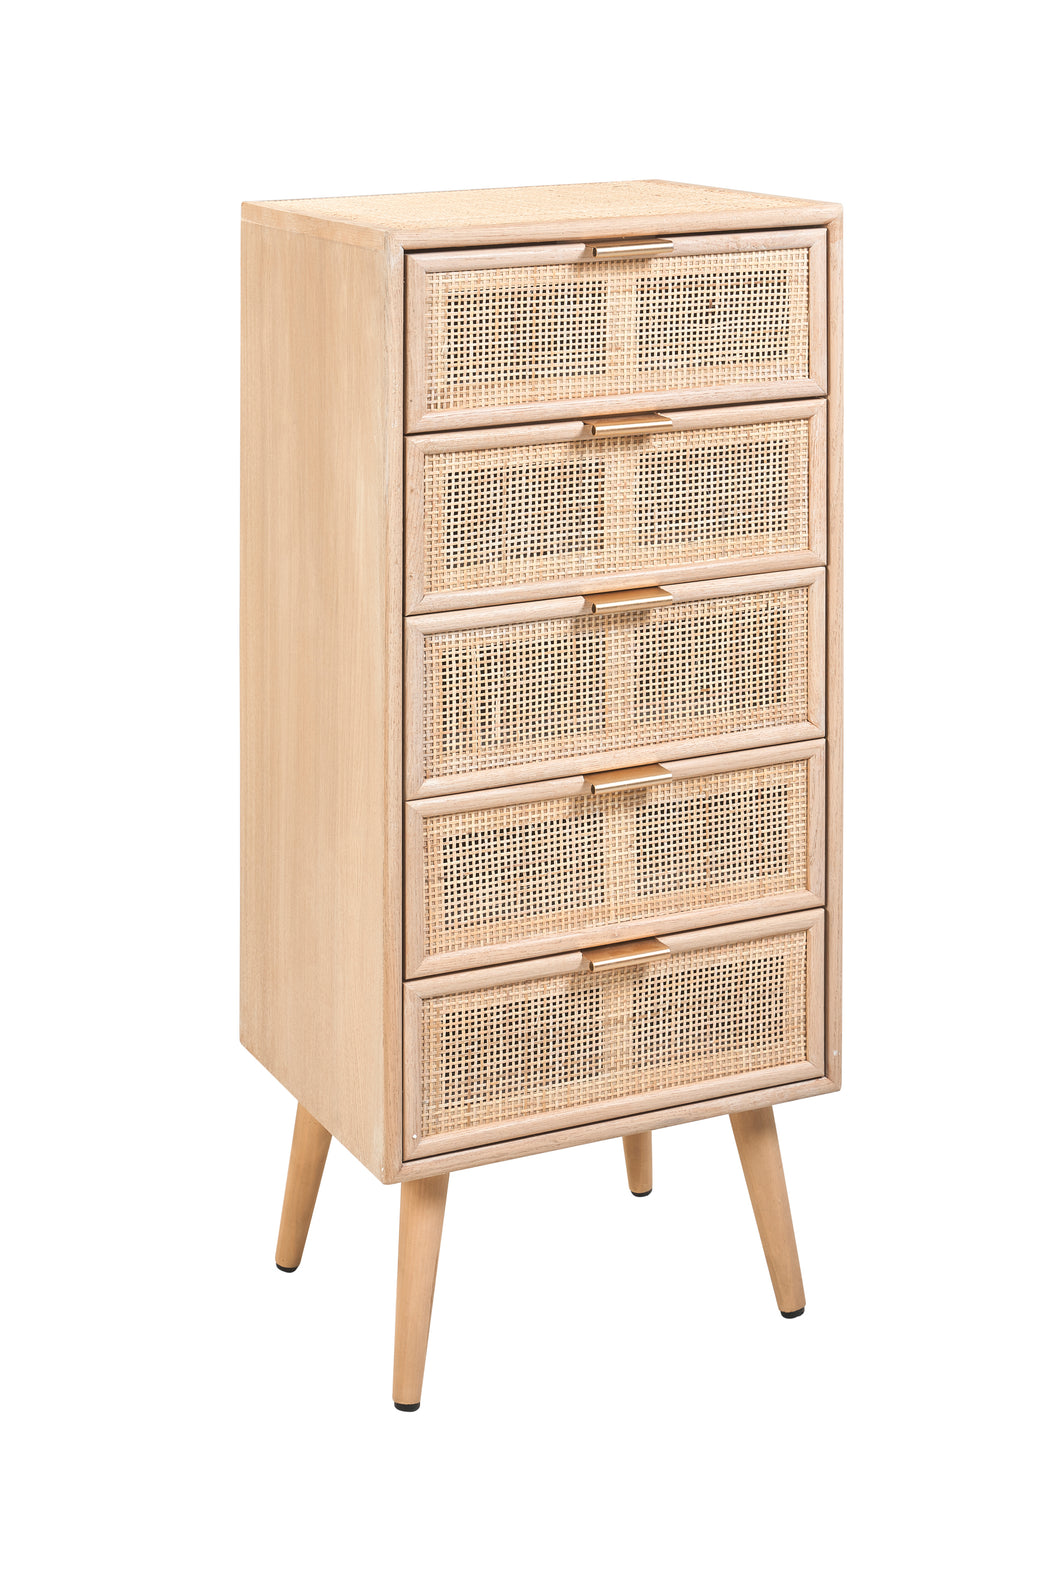 Orlando Store™ - Acapulco 5-drawer chest of drawers